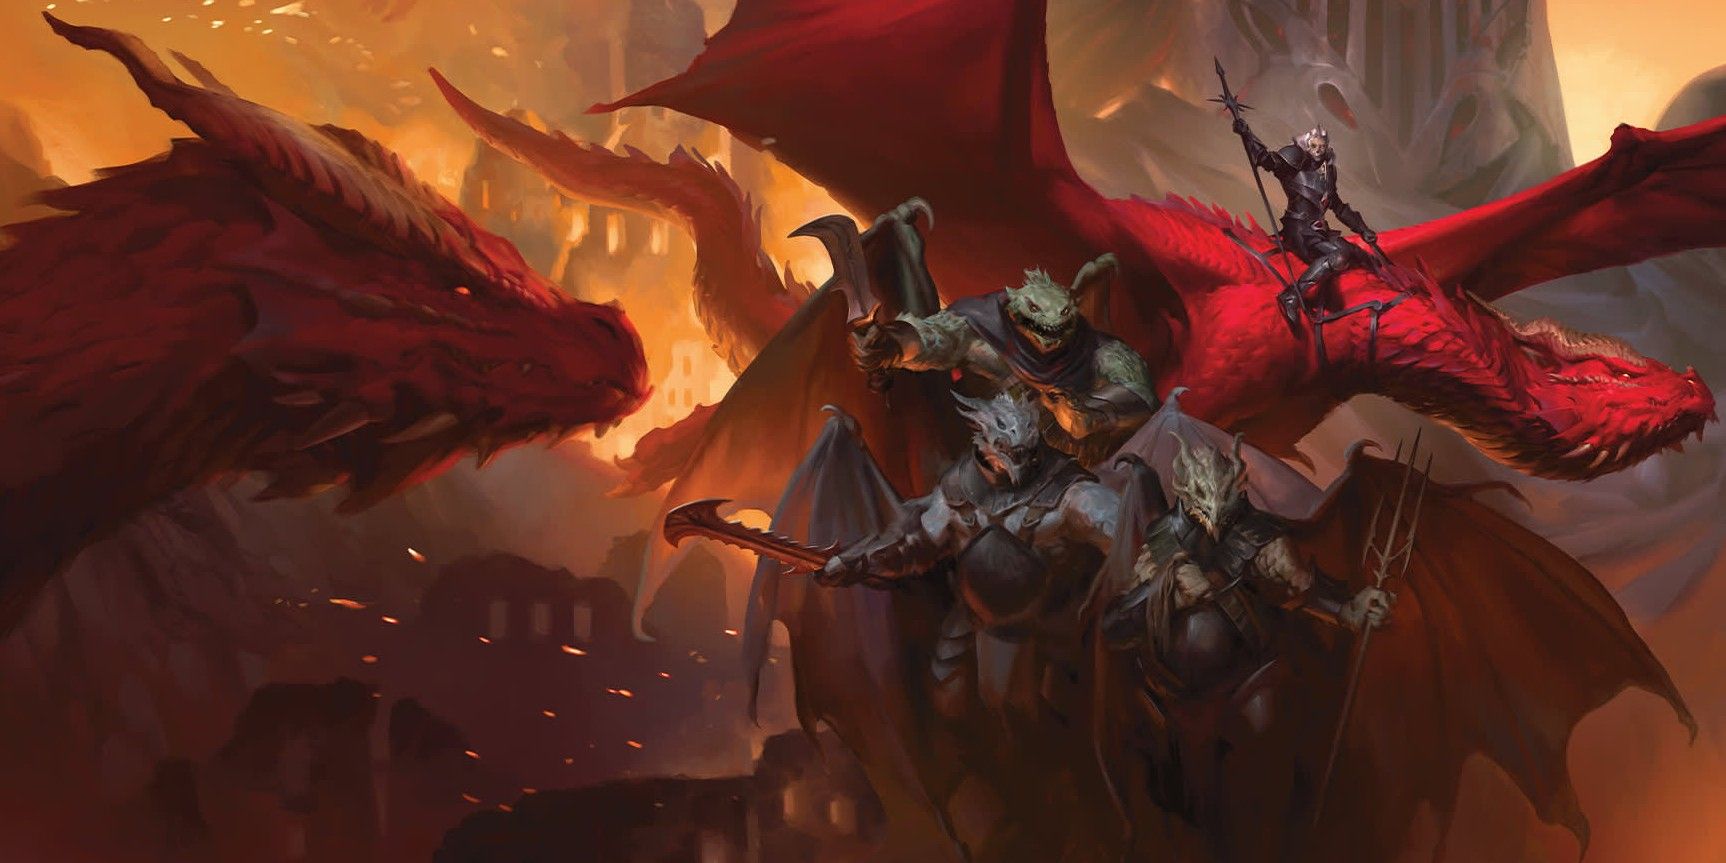 D&D Dragons that are red with one being ridden, three knights in the forefront.